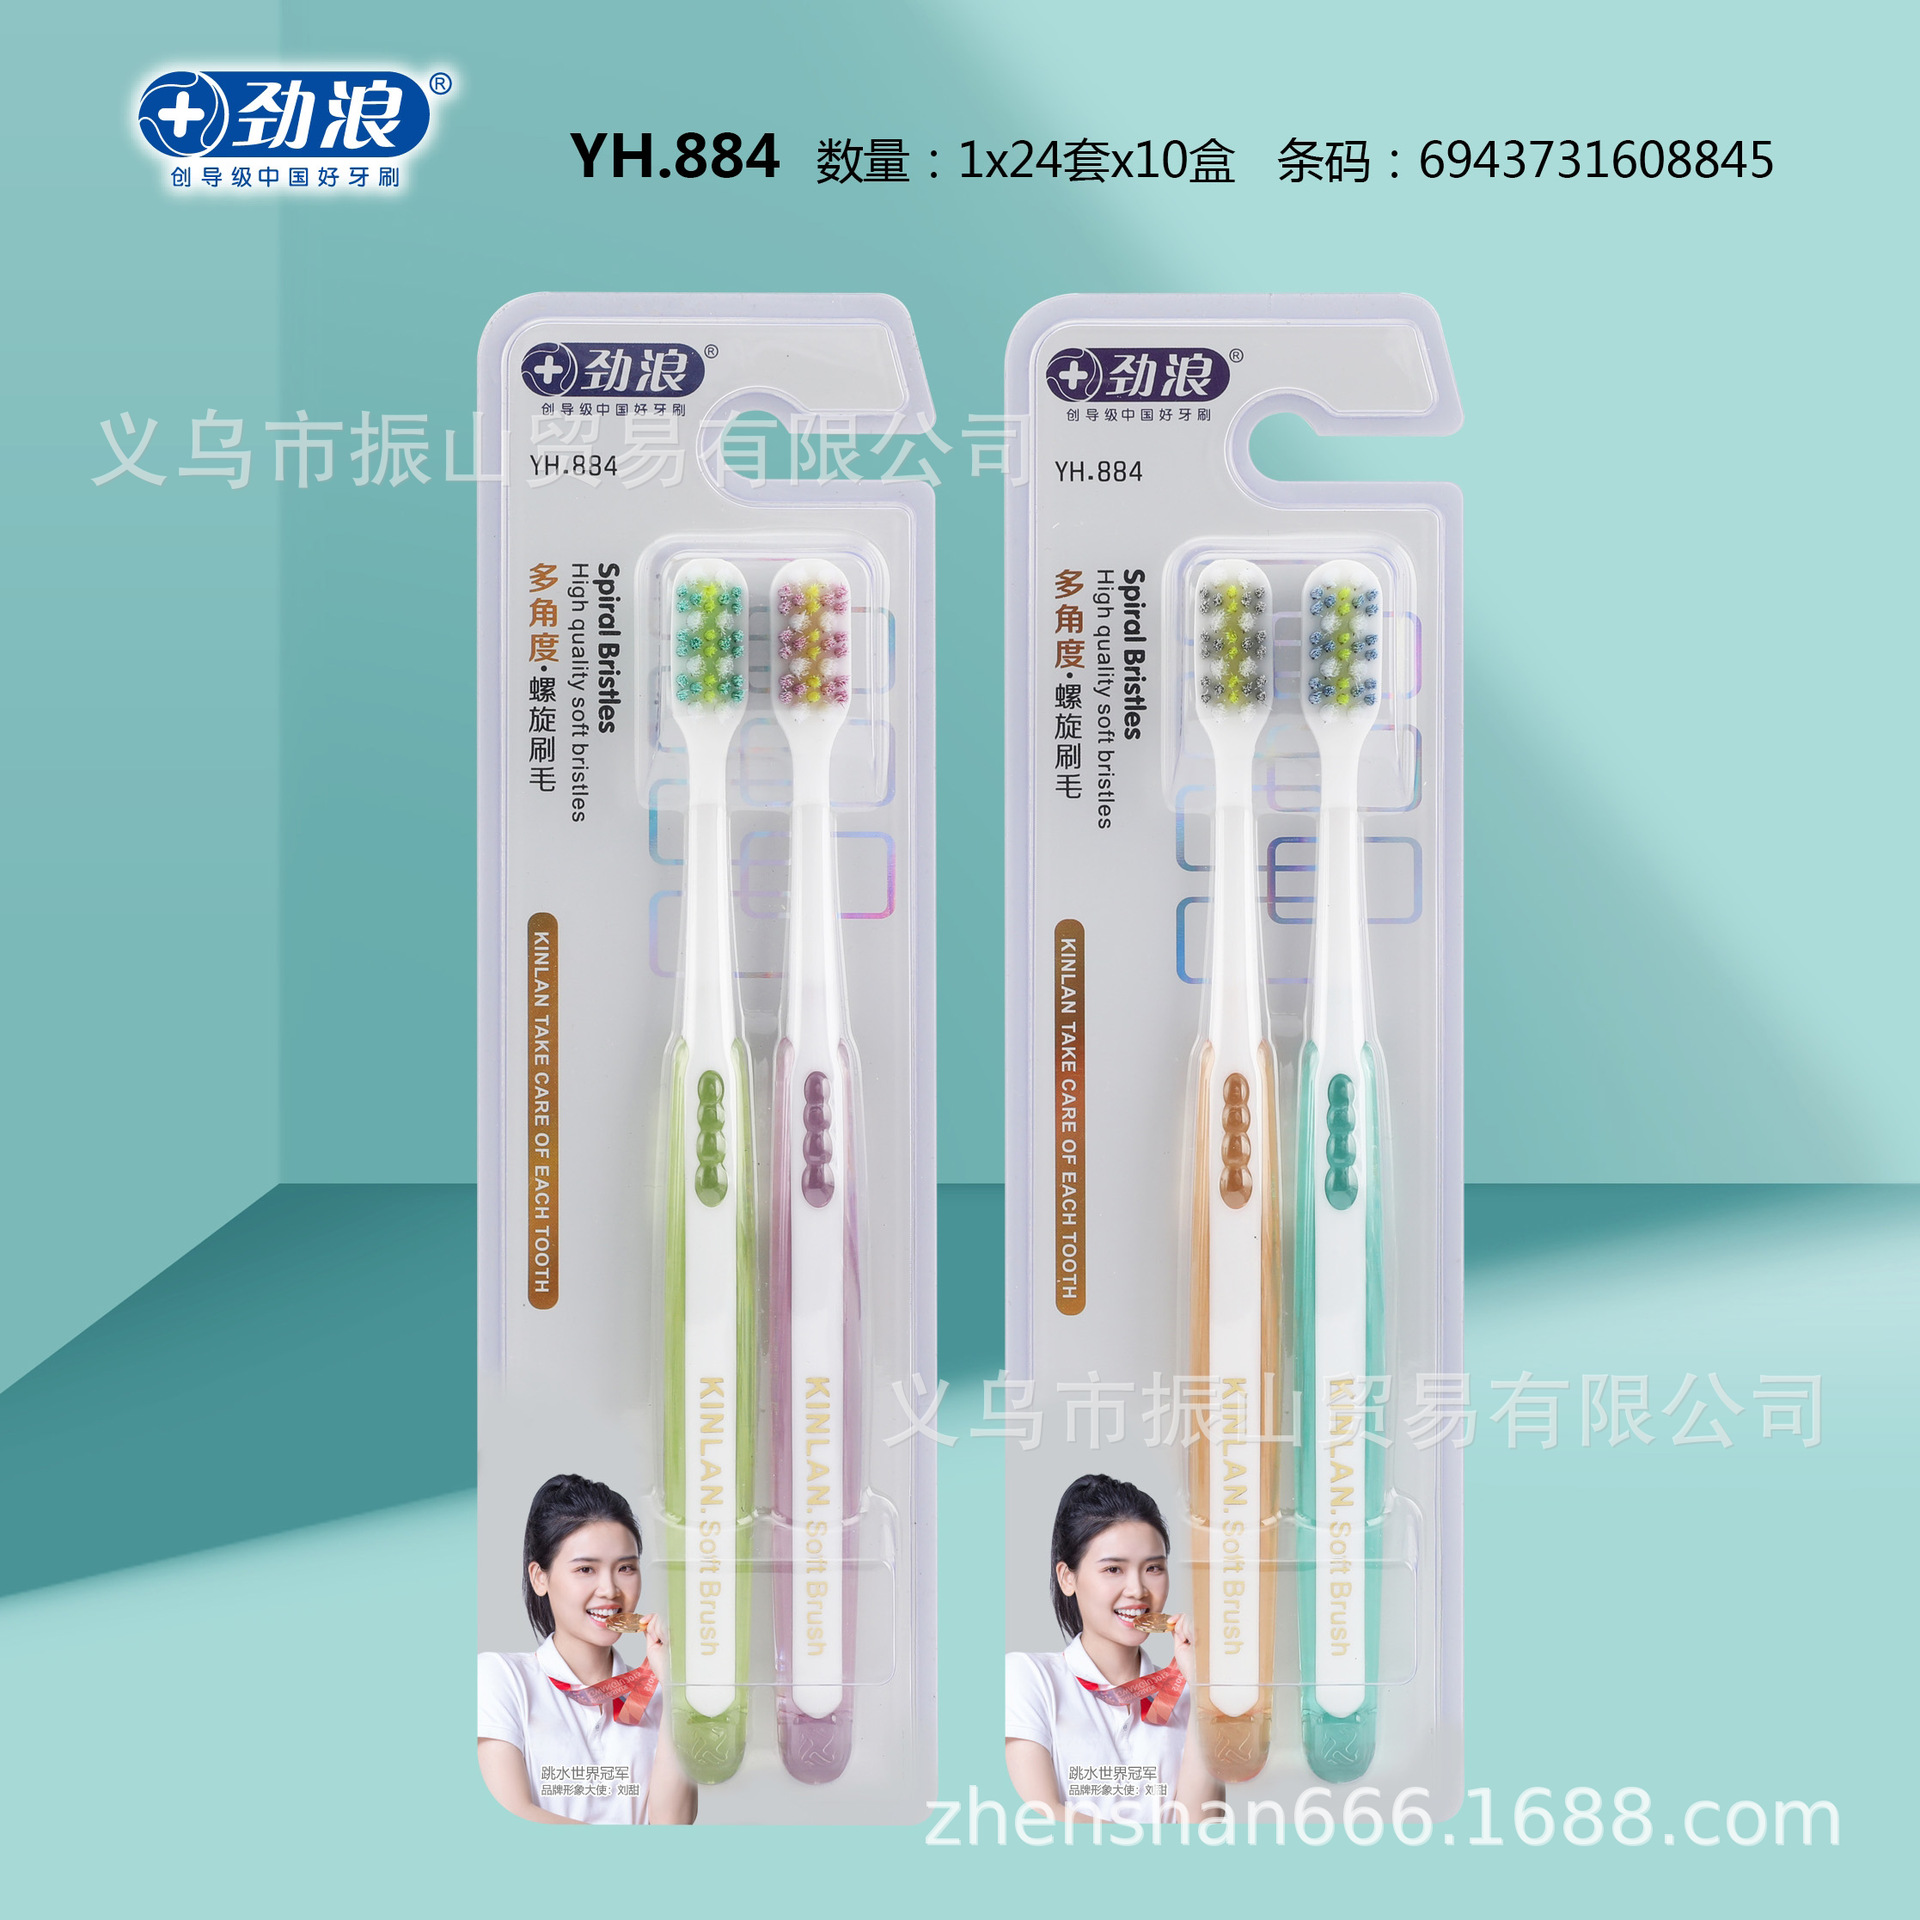 Strong Wave Yh.884 Multi-Angle Spiral Double Clean Soft Bristle Toothbrush